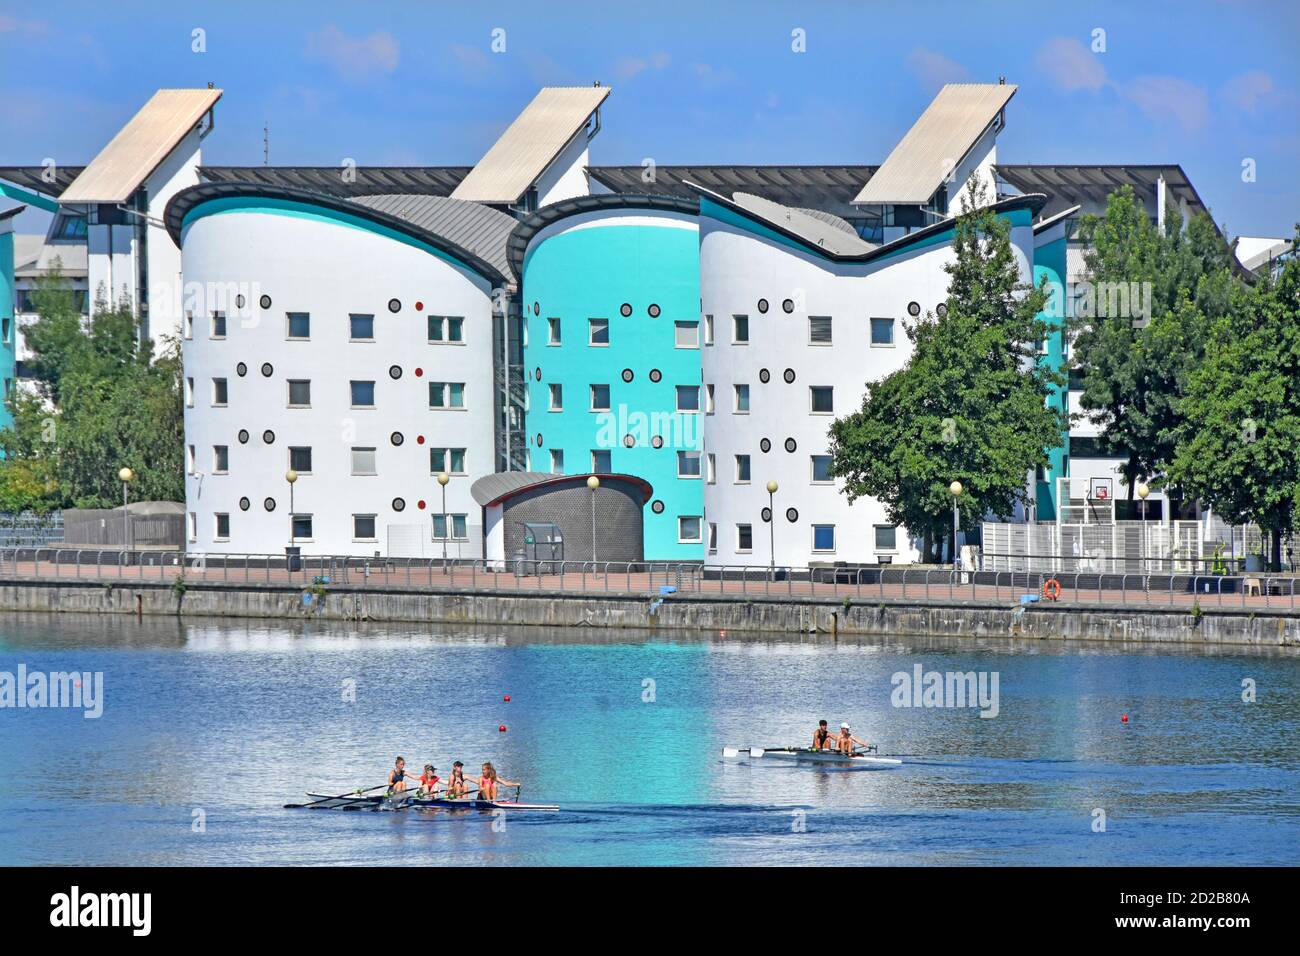 Royal Docks rowing course young women athletes training coxless quadruple scull & two young men rowers in double scull UEL campus buildings beyond UK Stock Photo